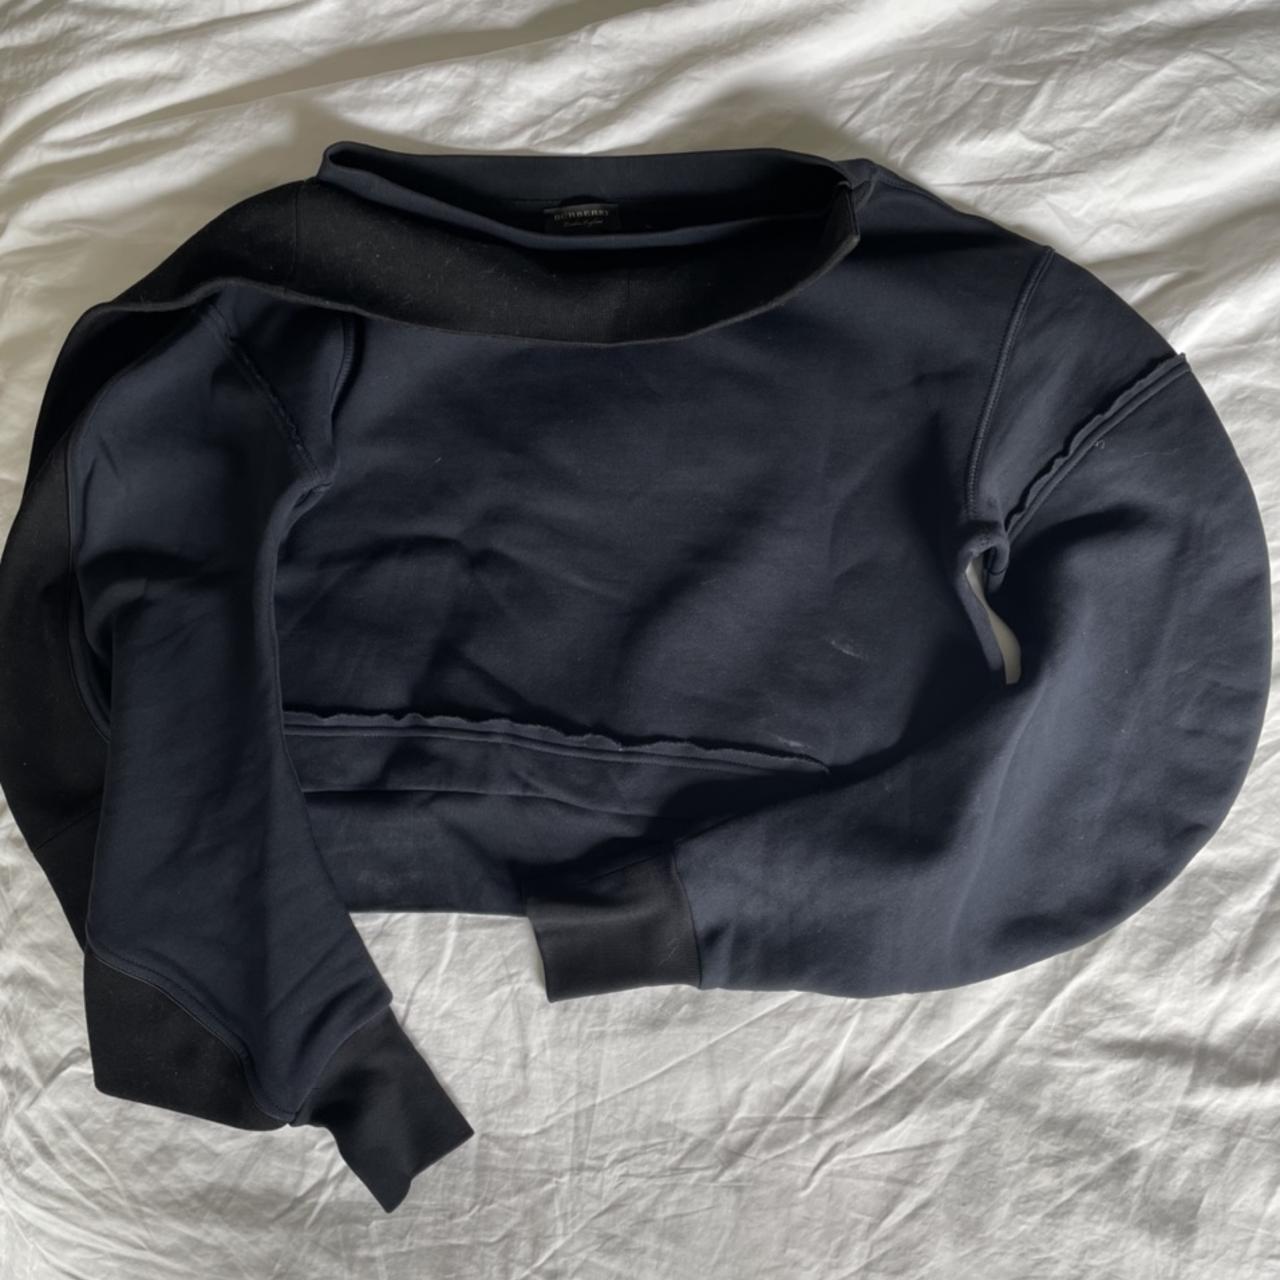 Burberry Women's Navy and Black Jumper (4)